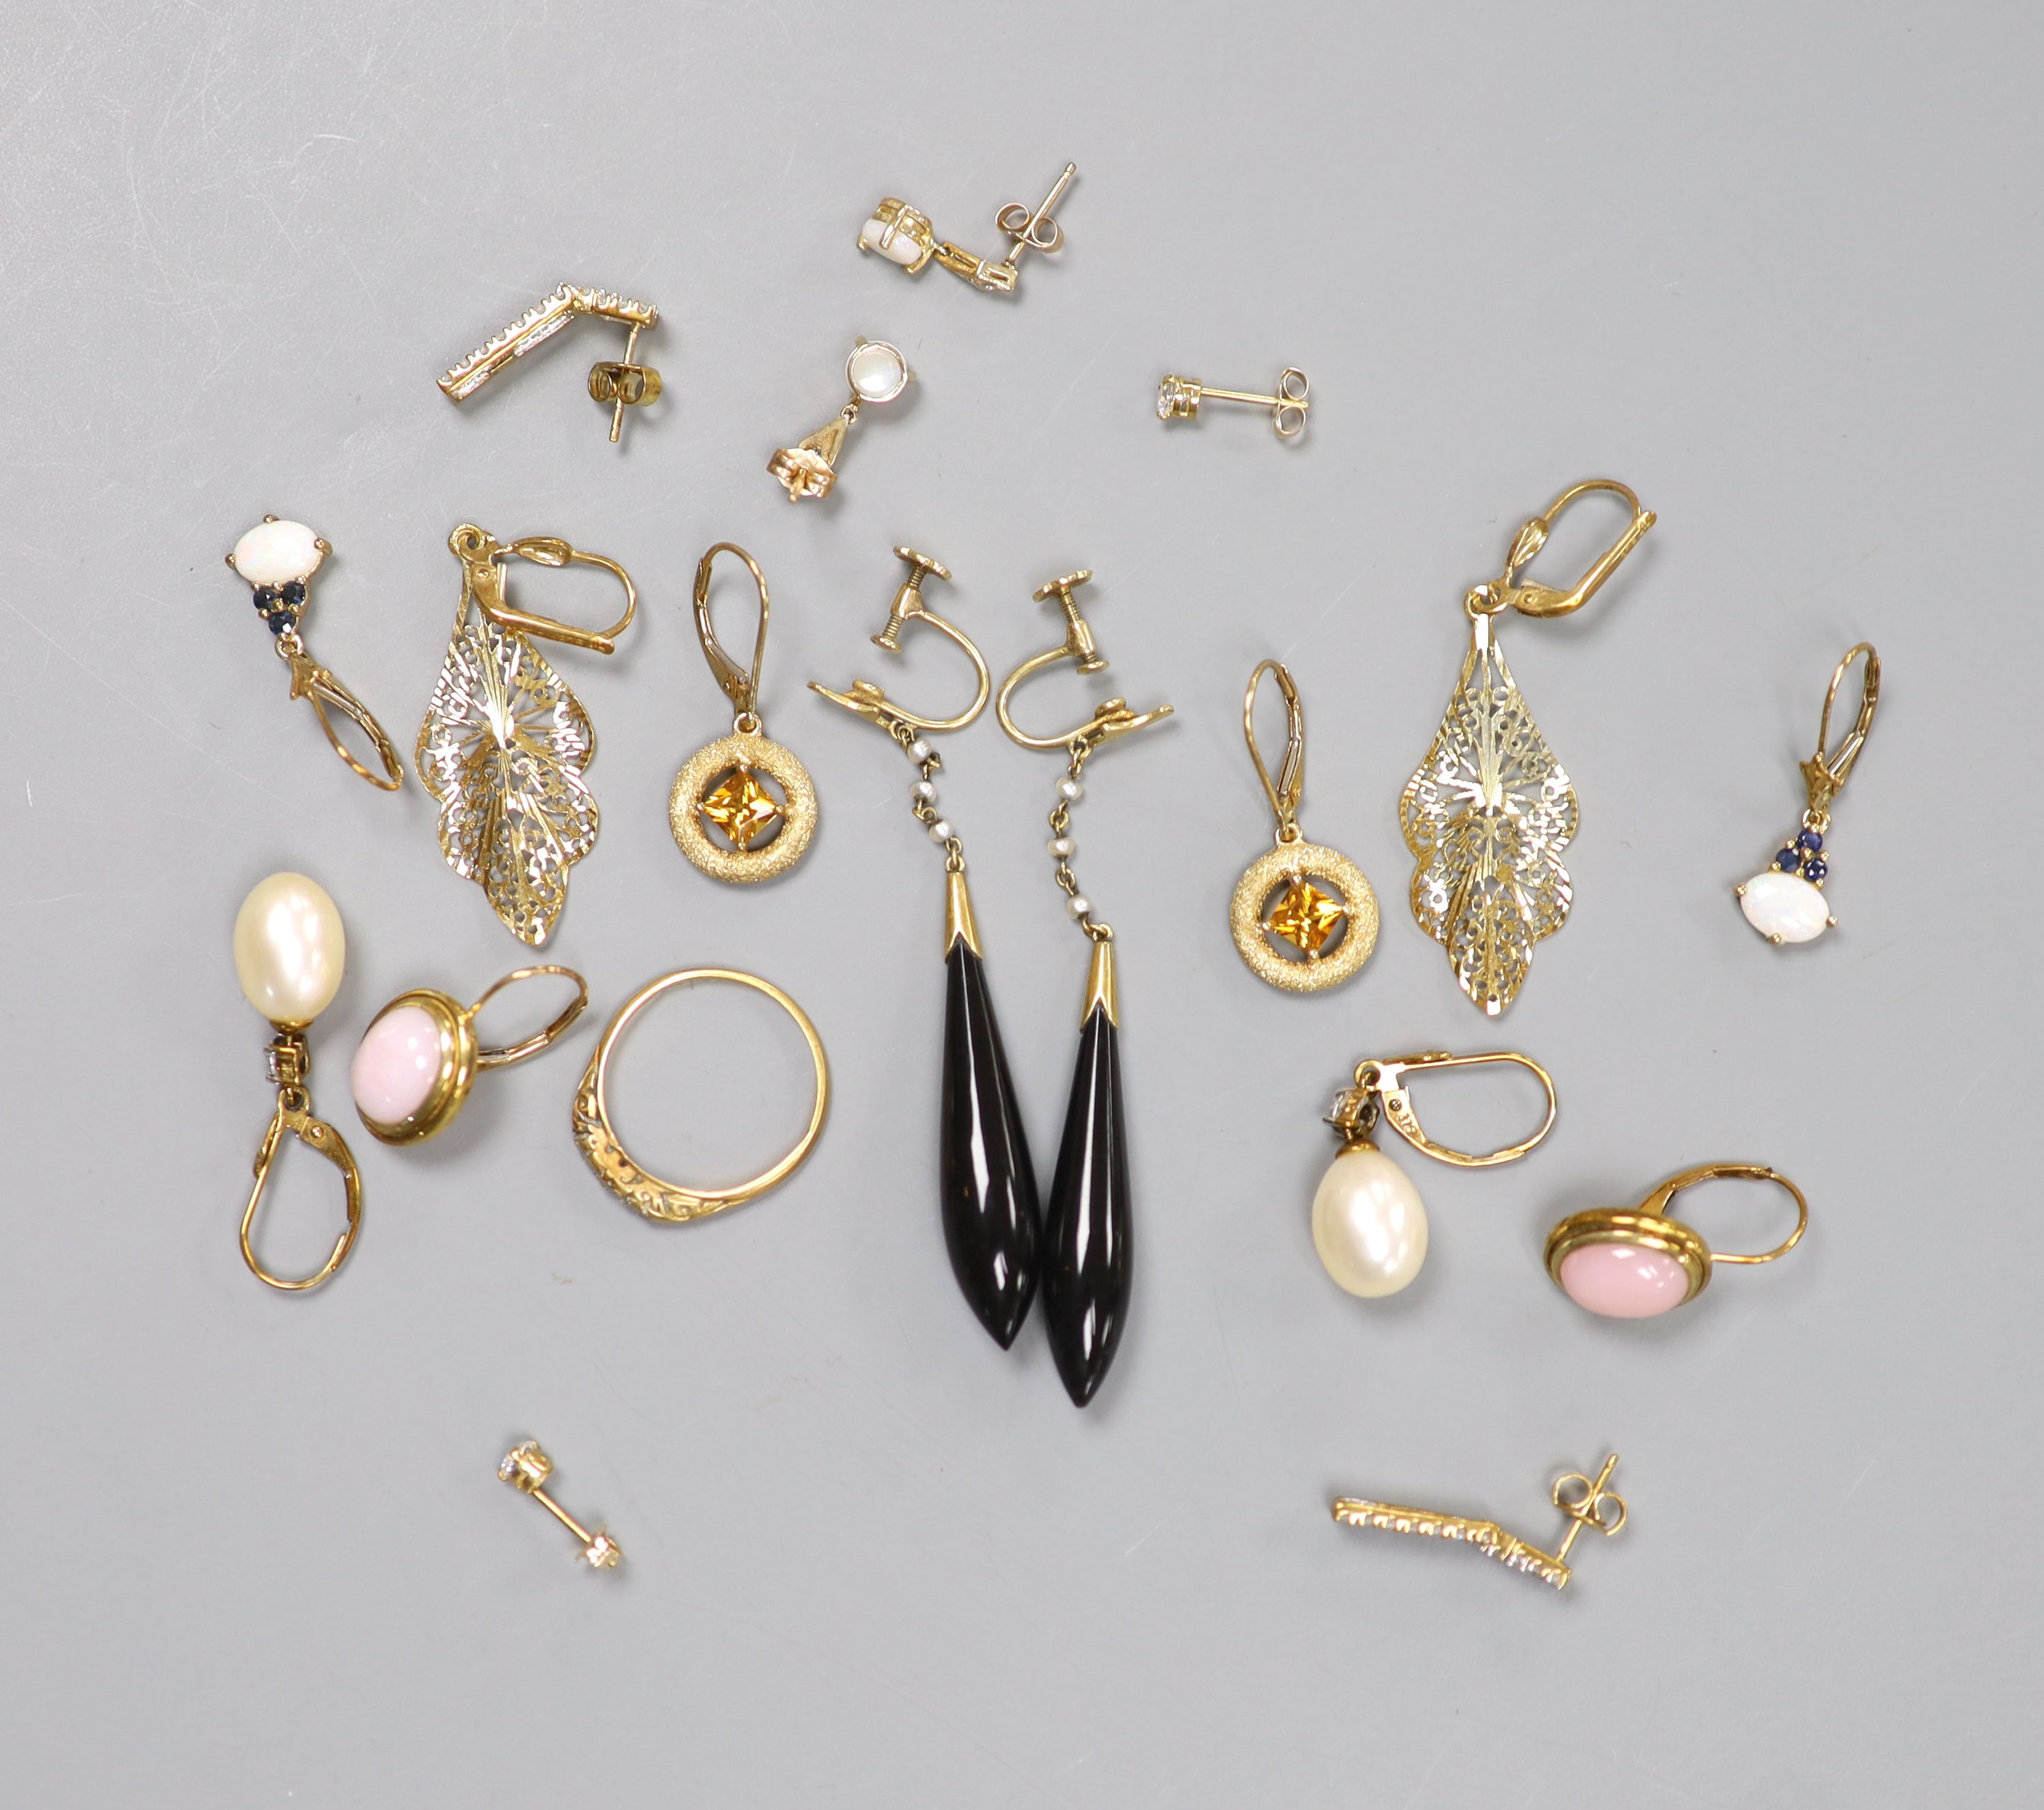 Seven pairs of hallmarked gold earrings, variously set, a single 14K marked stud earring, a pair of drop earrings and a yellow metal ring